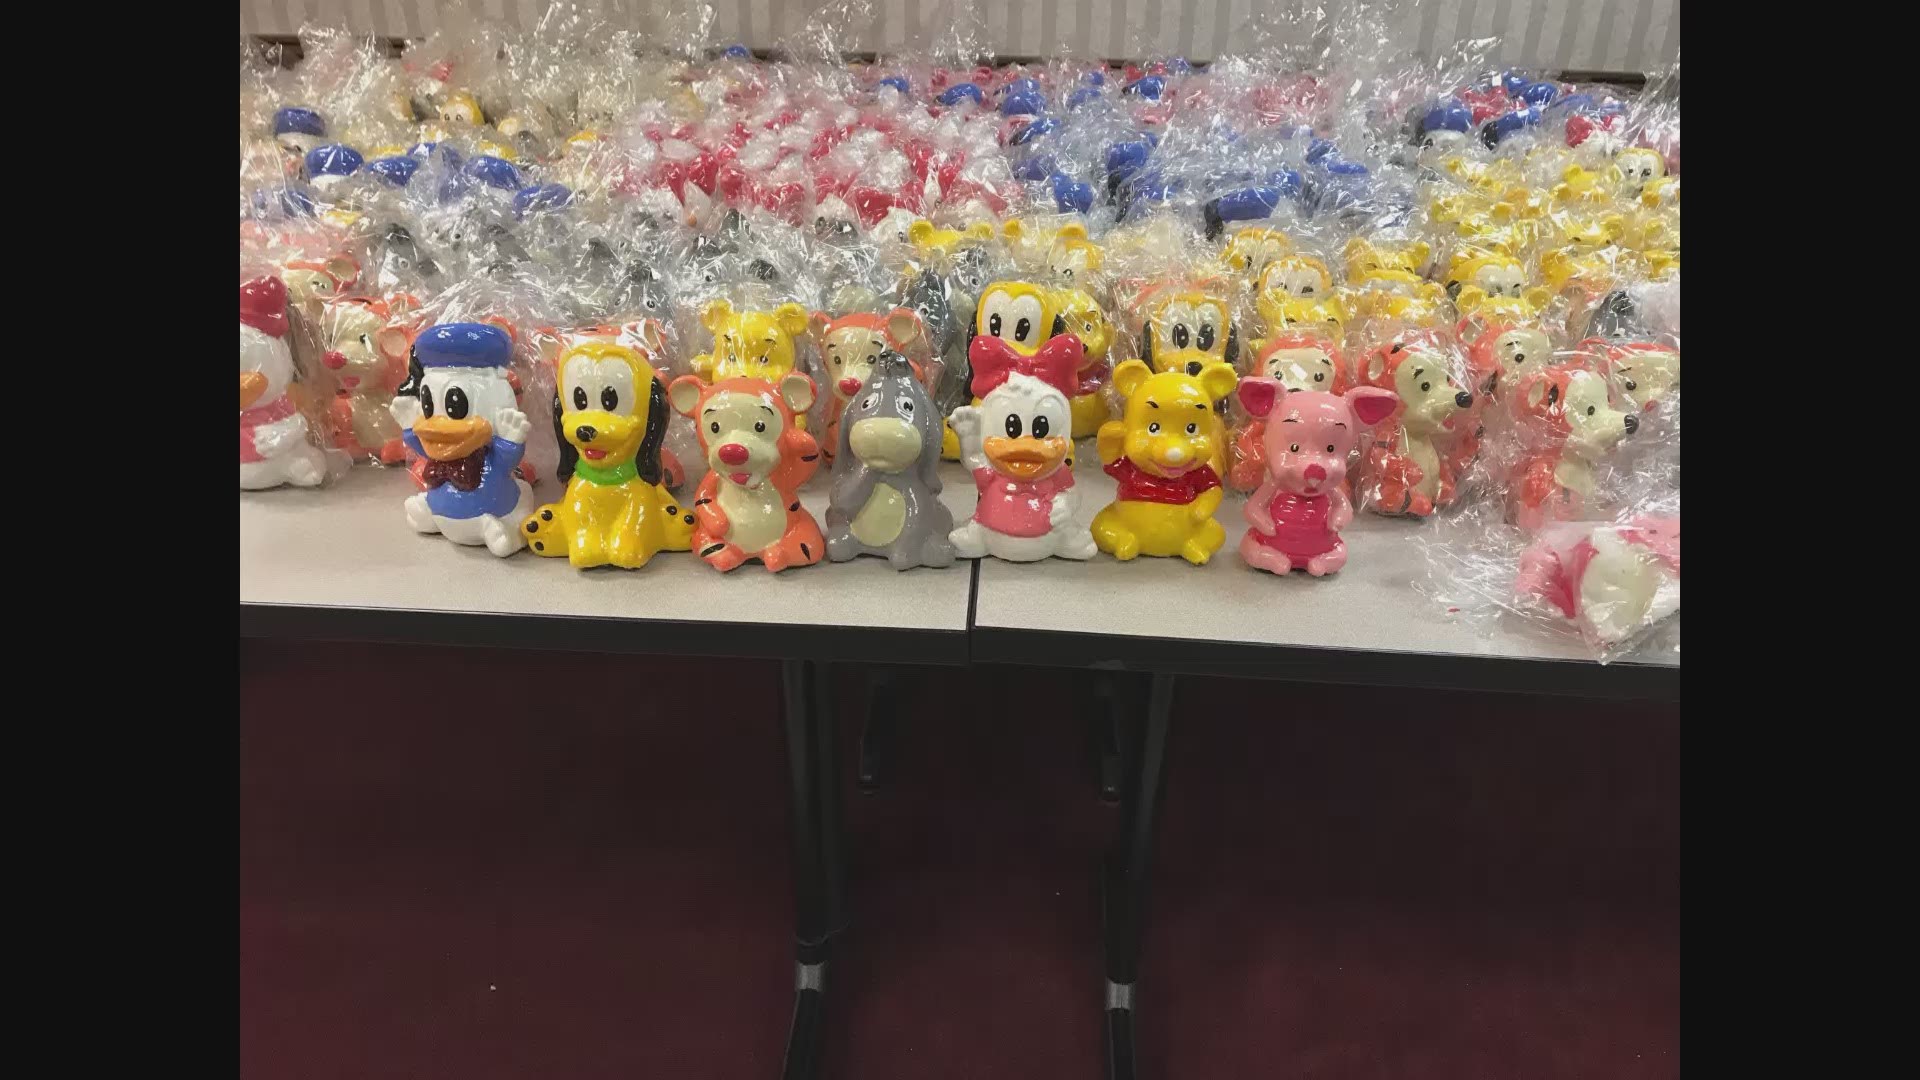 The DEA tells CBS46 the origin of the shipment was Mexico and the shipment also contained hundreds of legitimate ceramic-like Disney figurines which were mixed in with the wax figurines and used as a "cover load."